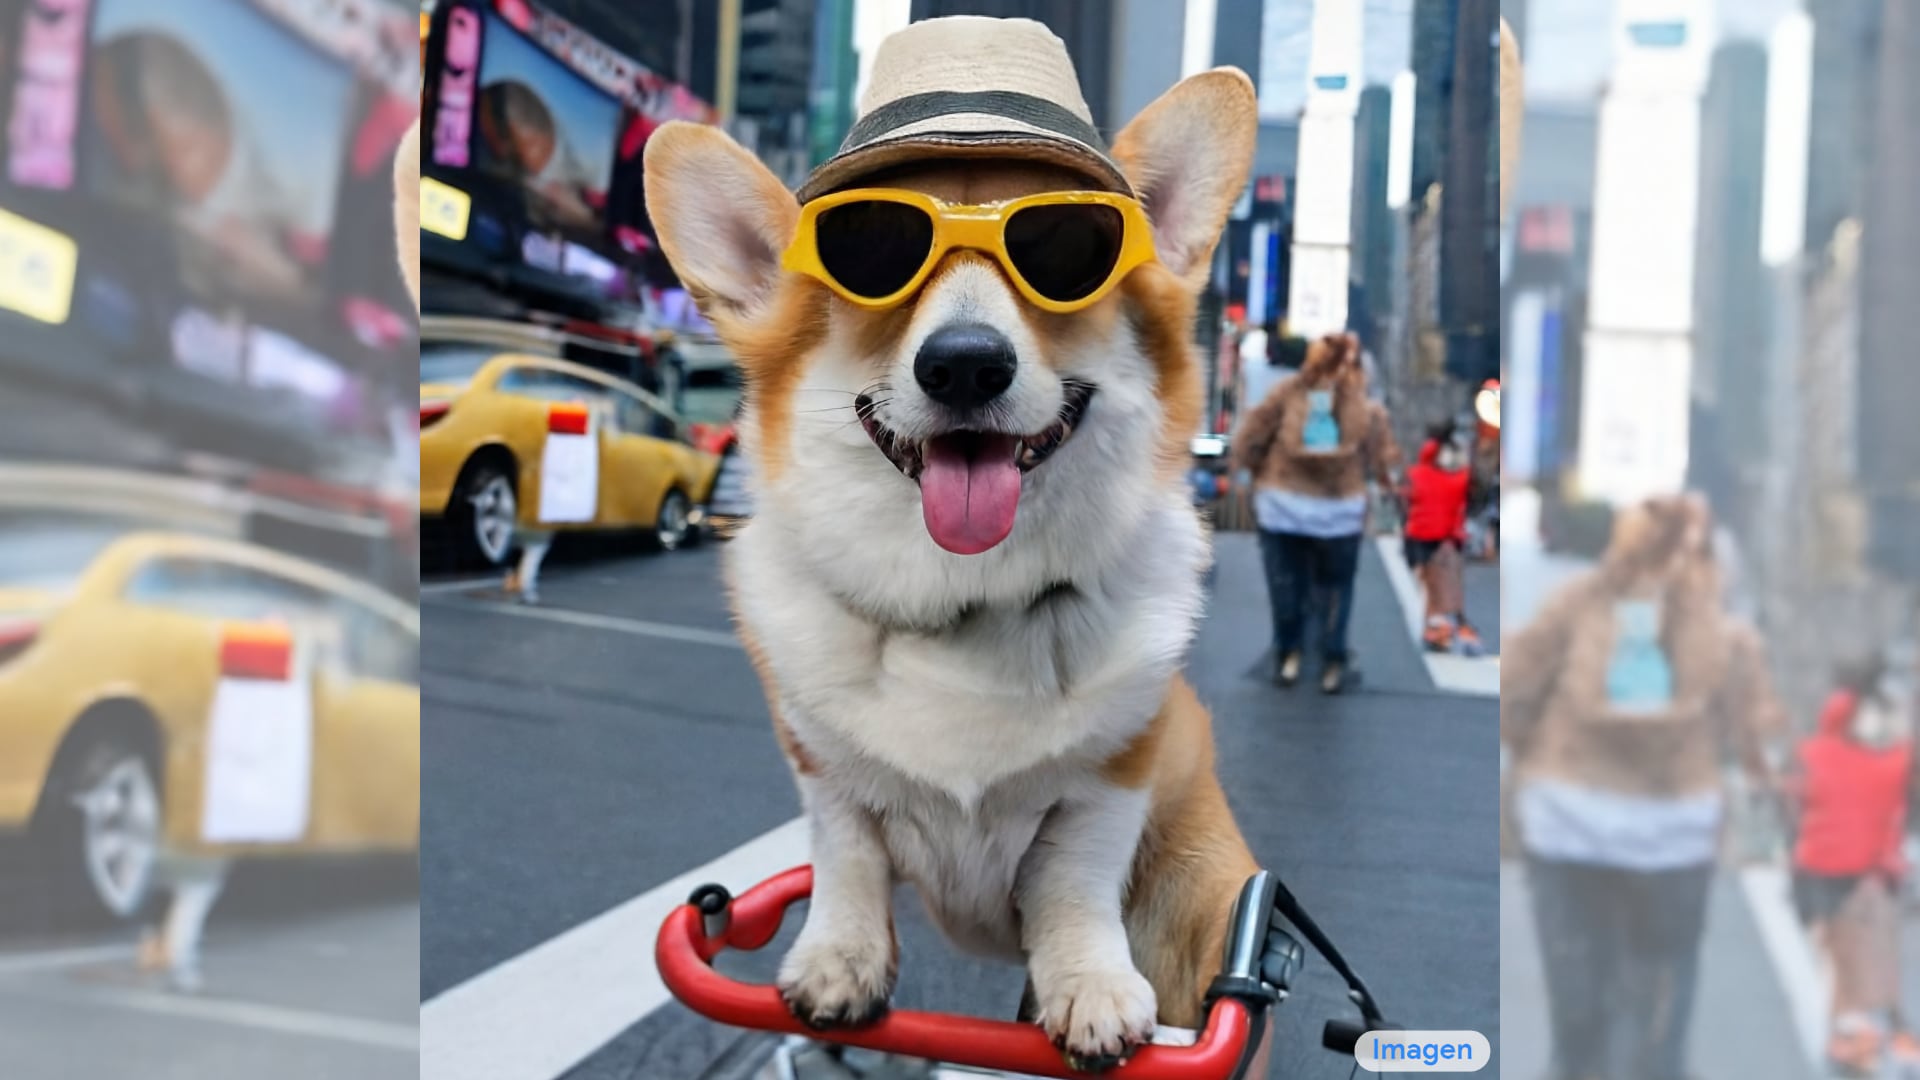 A photo of a Corgi dog riding a bike in Times Square. It is wearing sunglasses and a beach hat: Imagen